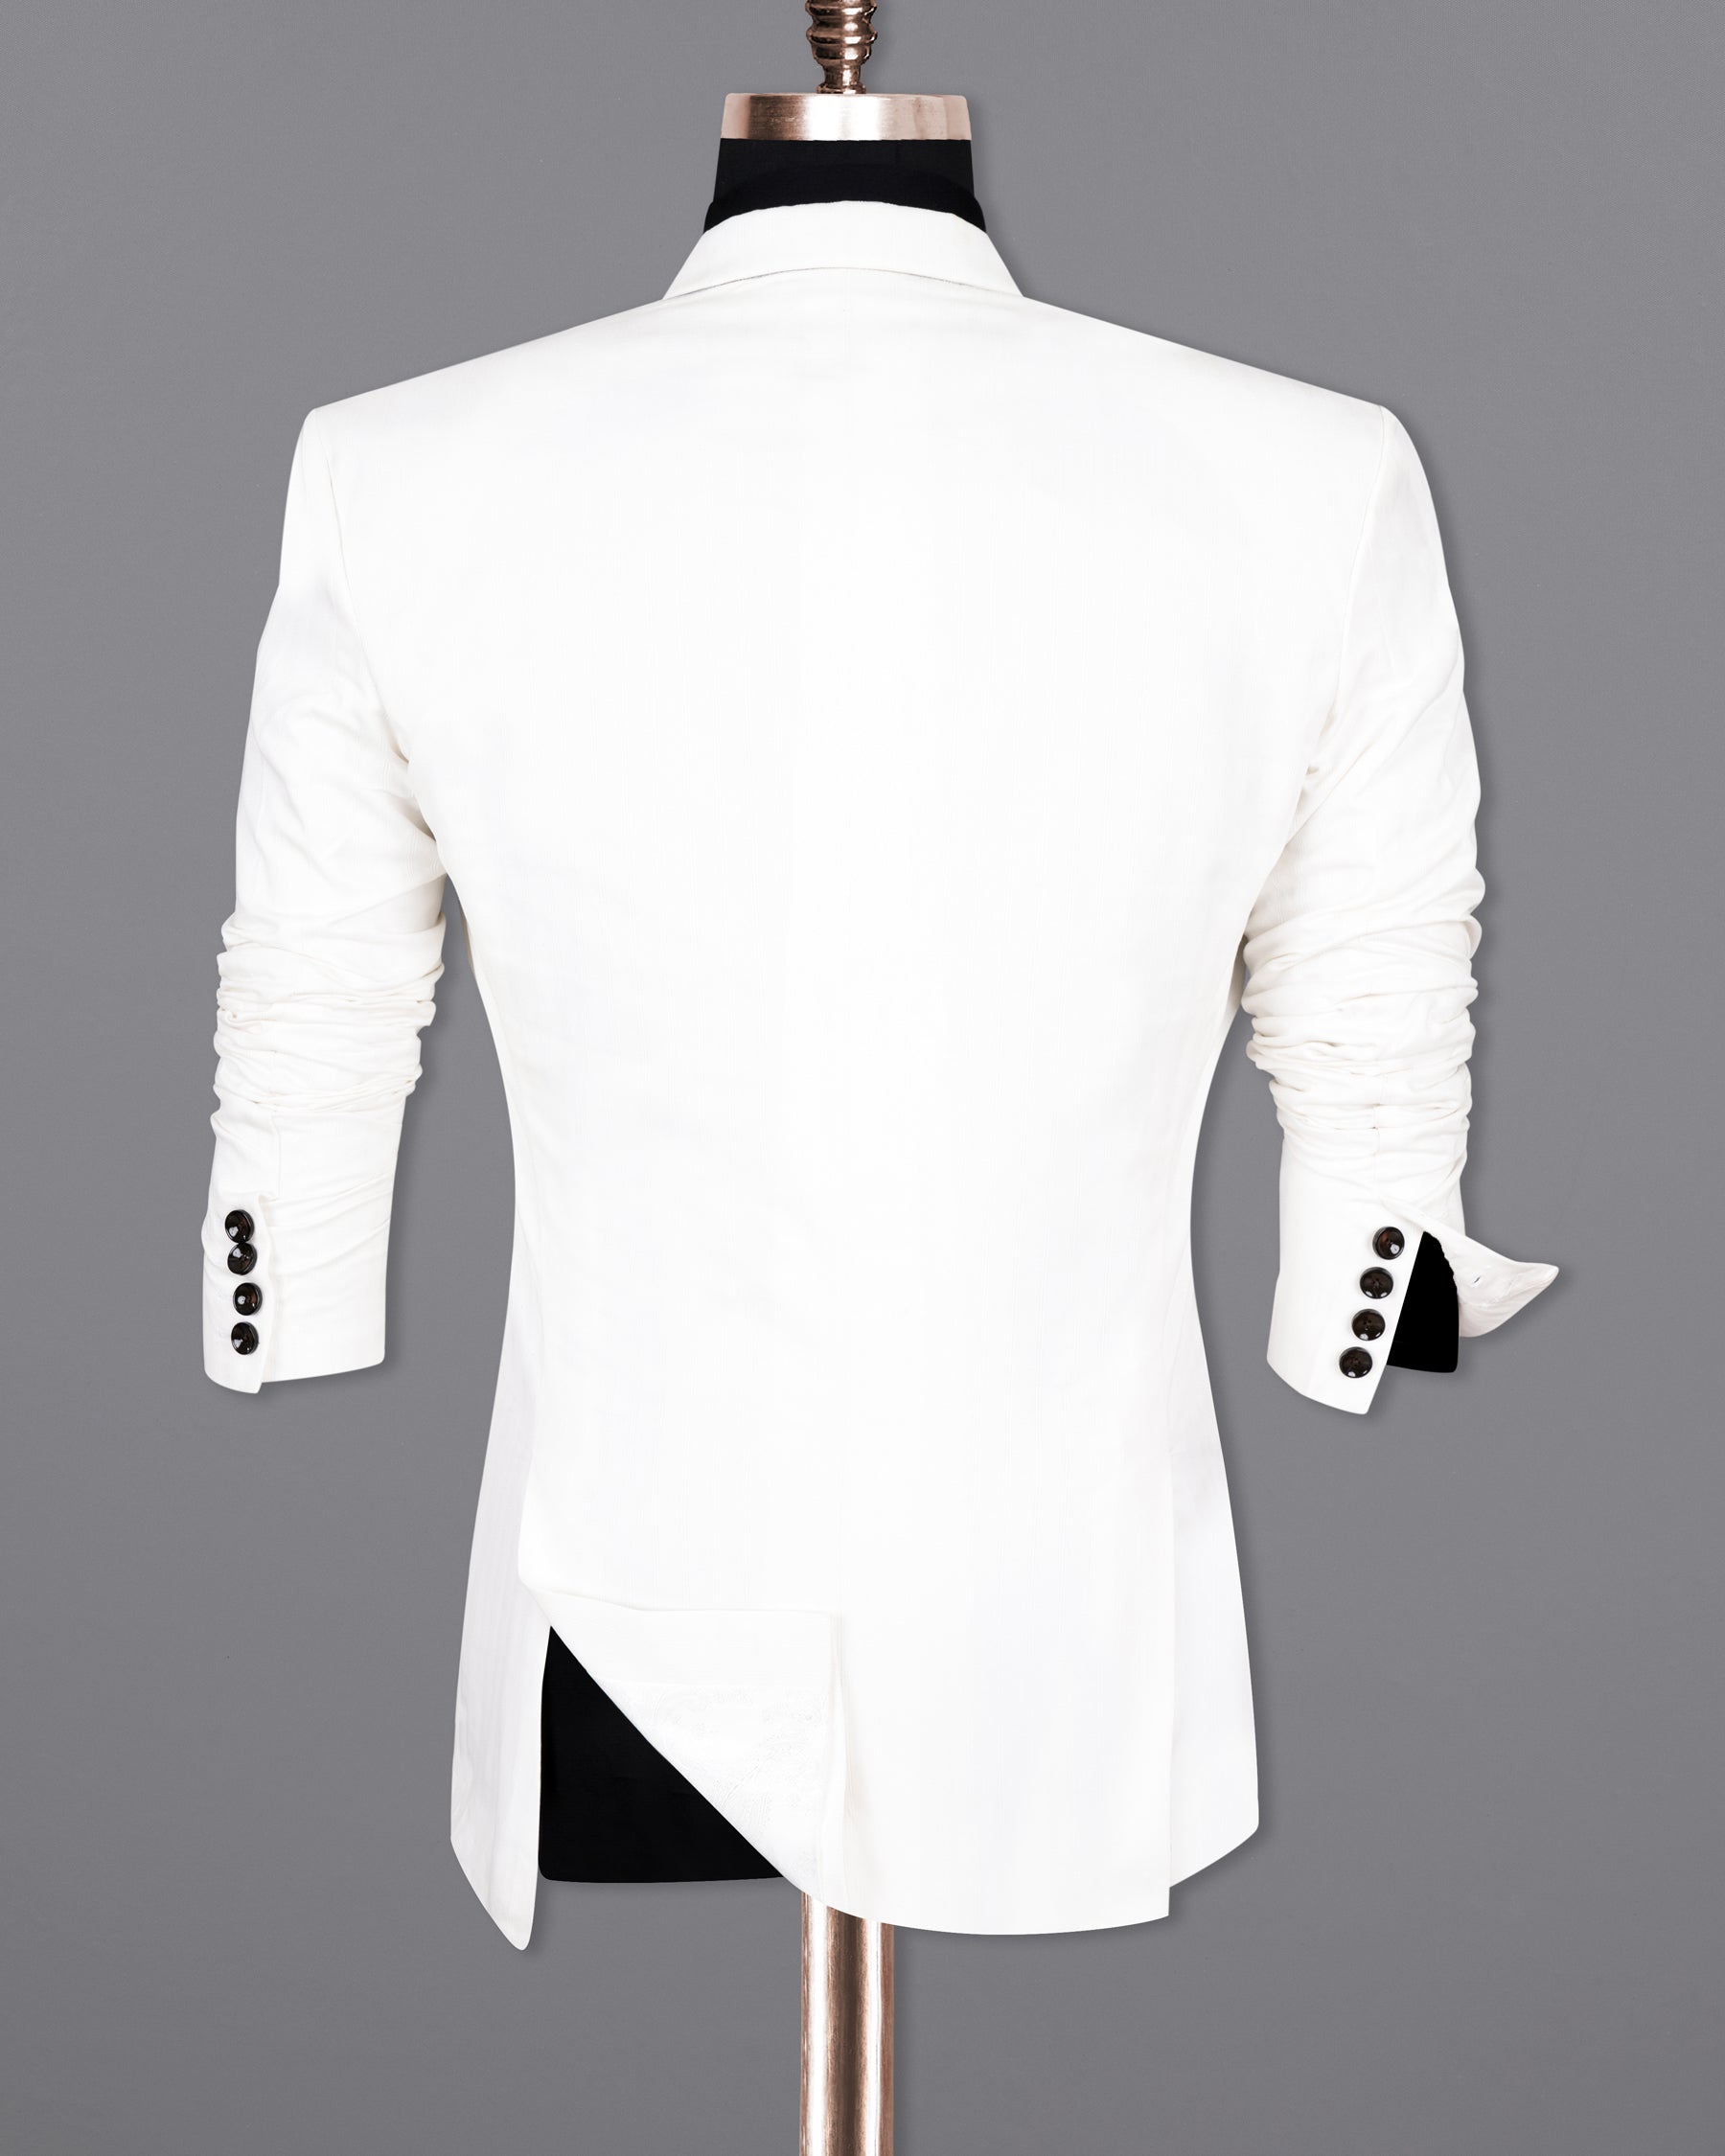 Bright White Subtle Striped  Double Breasted Premium Cotton Blazer BL1395-DB-36, BL1395-DB-38, BL1395-DB-40, BL1395-DB-42, BL1395-DB-44, BL1395-DB-46, BL1395-DB-48, BL1395-DB-50, BL1395-DB-52, BL1395-DB-54, BL1395-DB-56, BL1395-DB-58, BL1395-DB-60